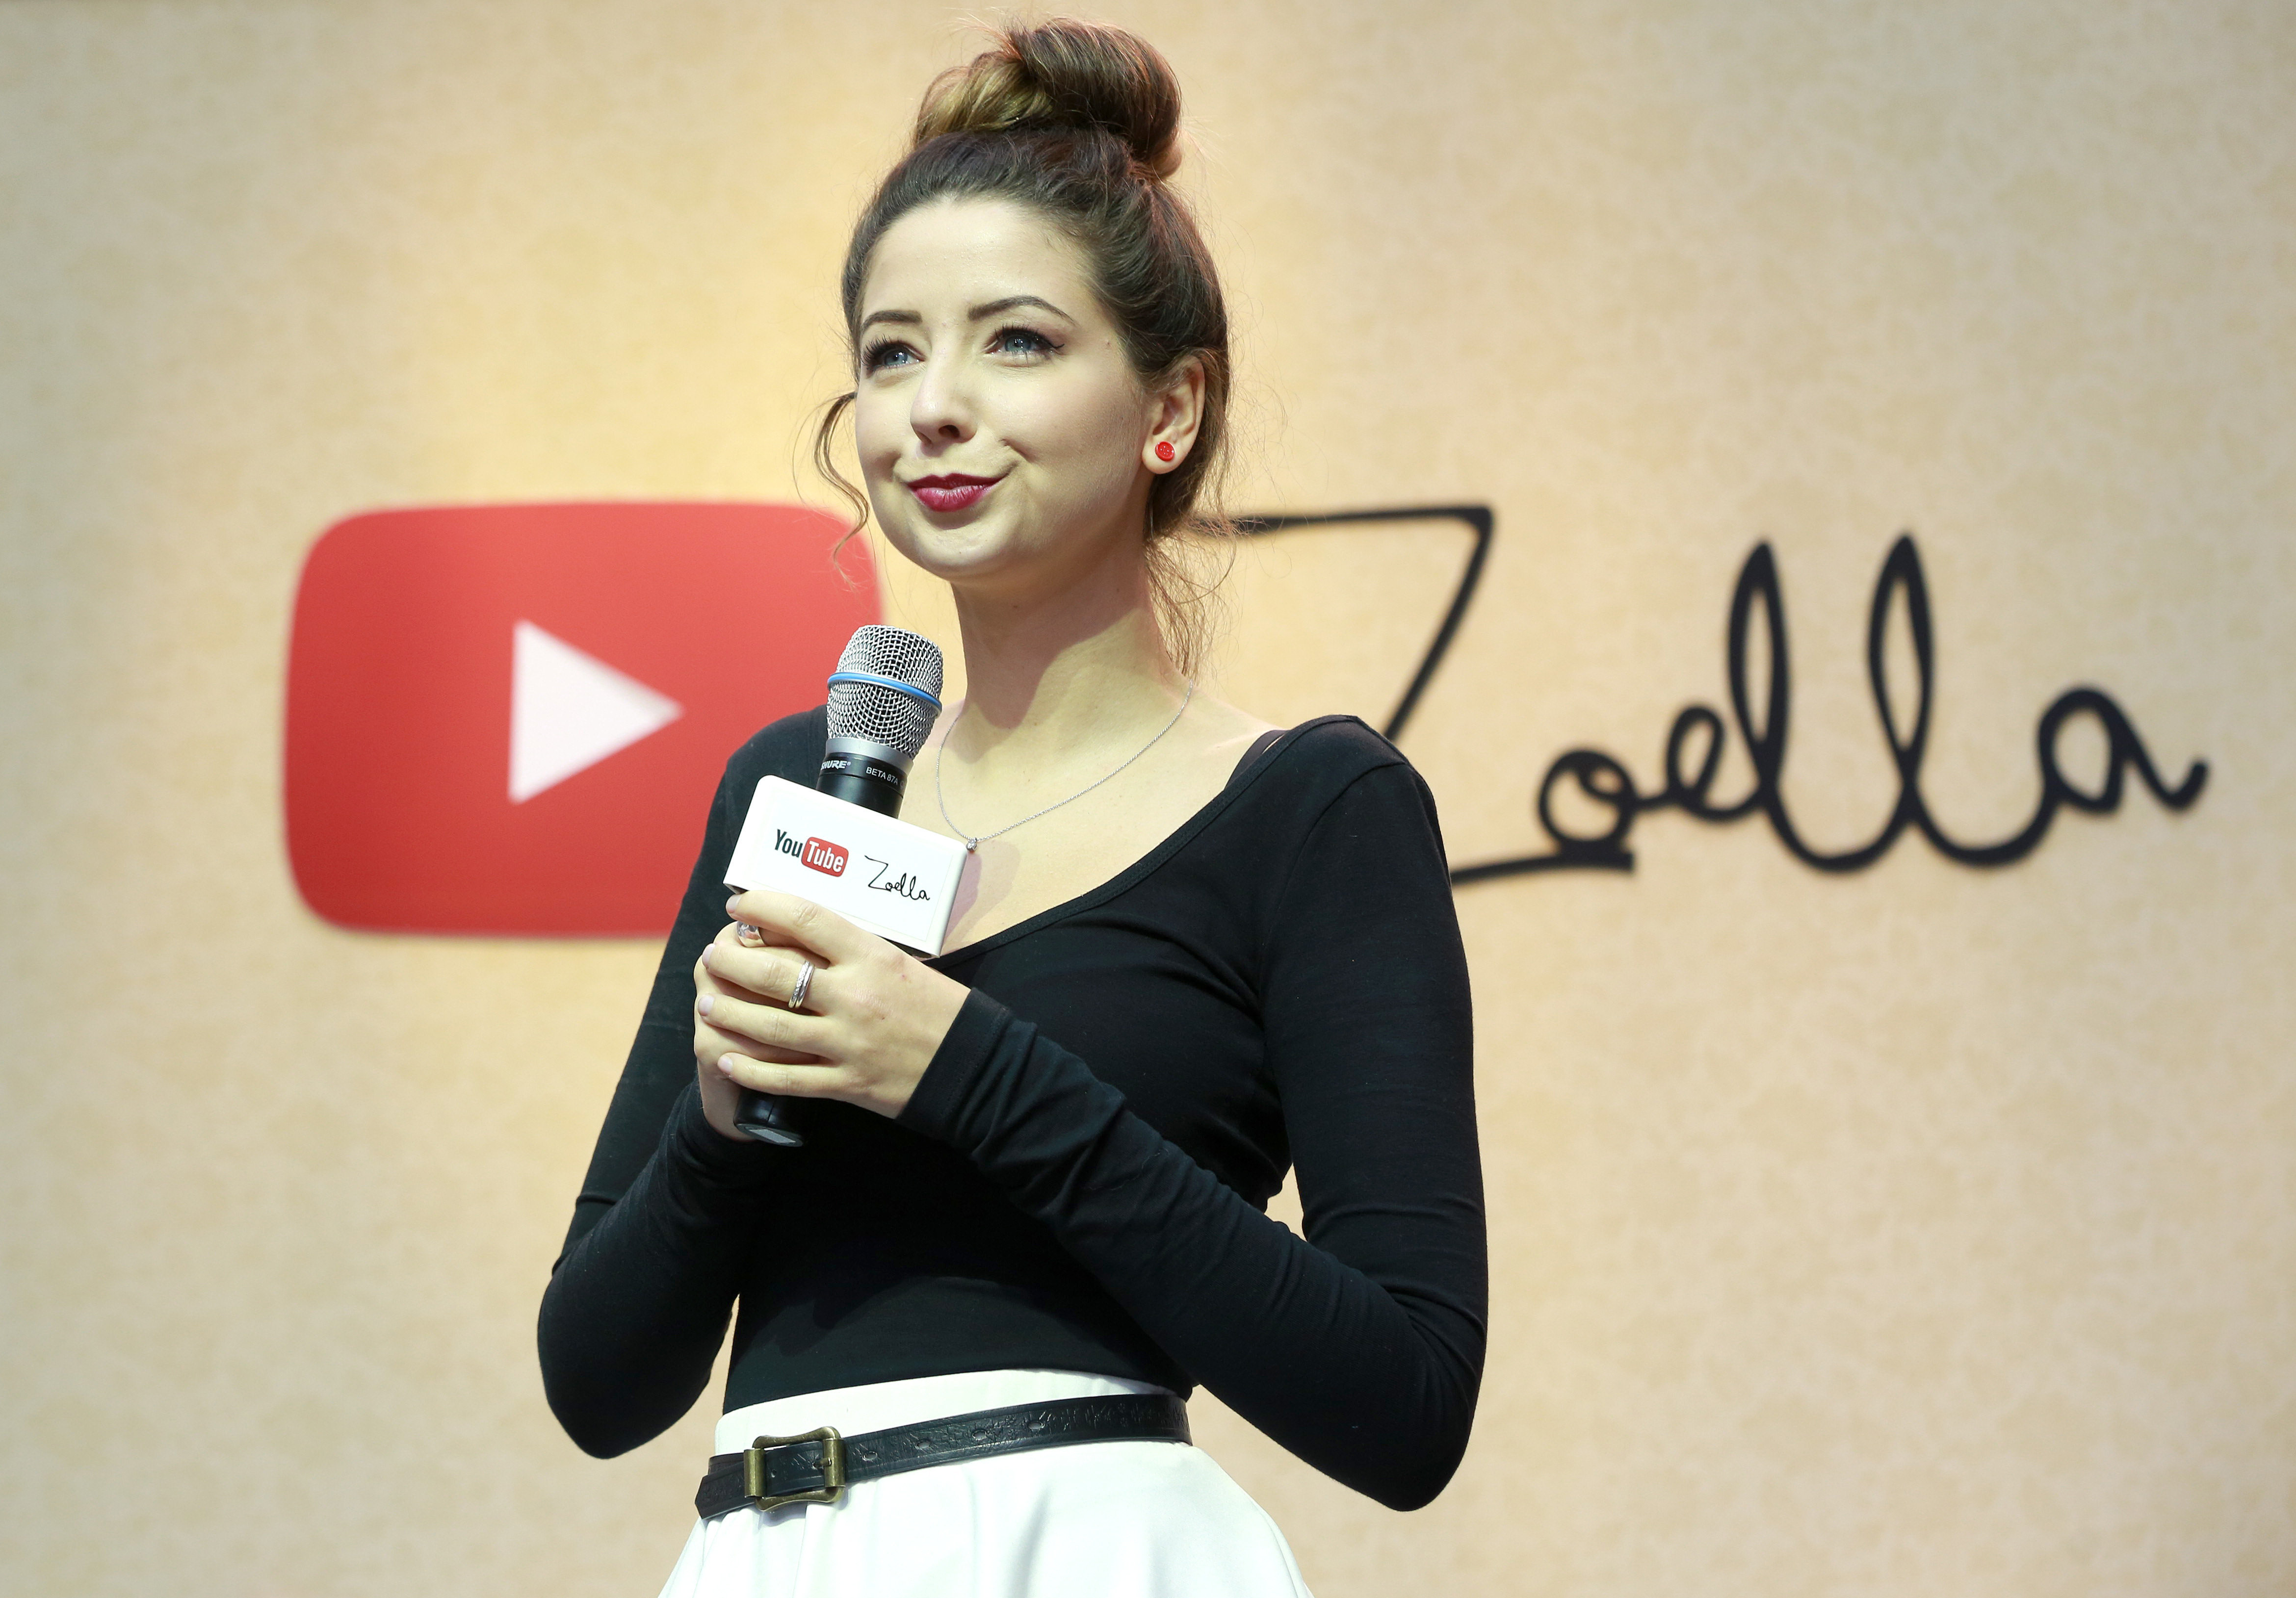 <strong>Zoella has issued an apology</strong>